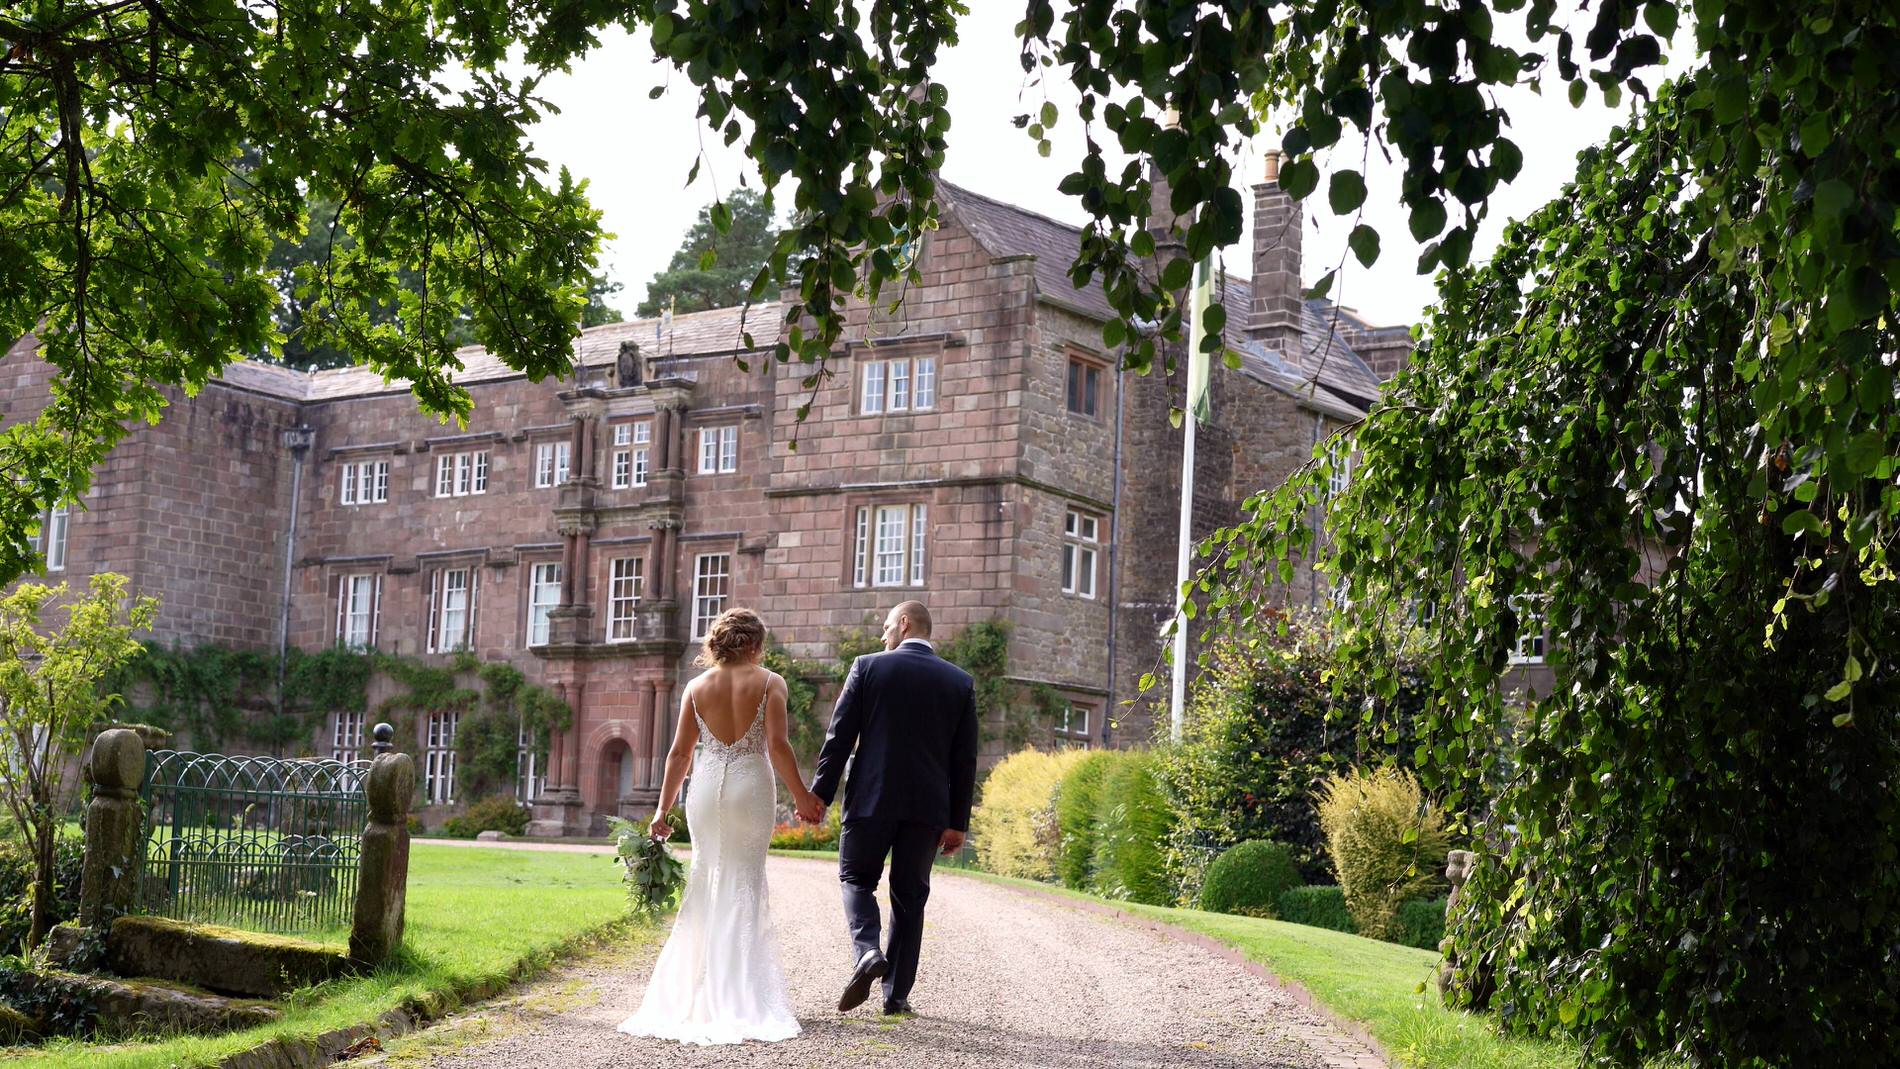 the couple walk through the gardens at Browsholme Hall in lancashire